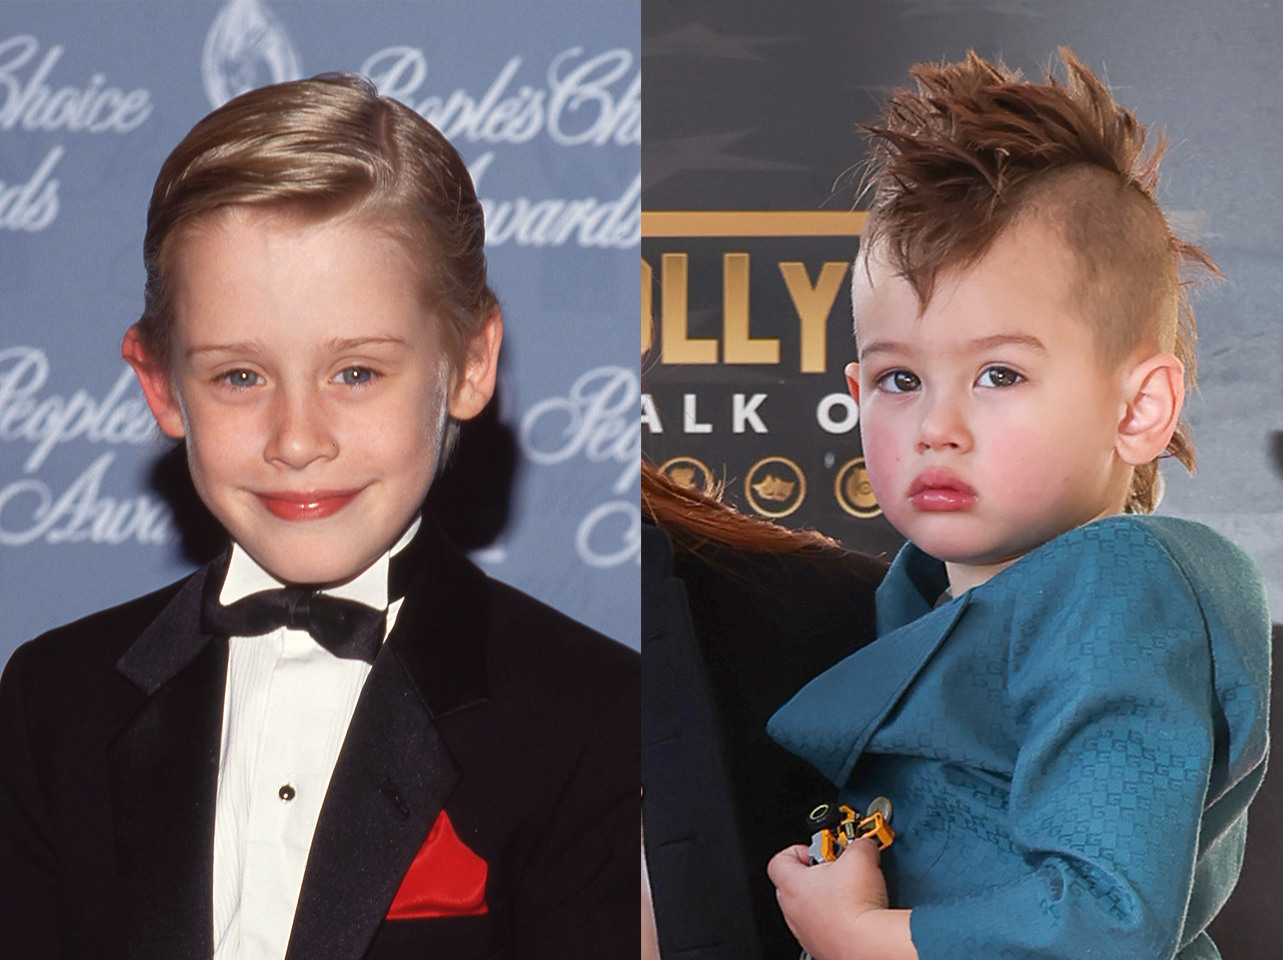 Macaulay Culkin in the '80s vs his son | Source: Getty Images